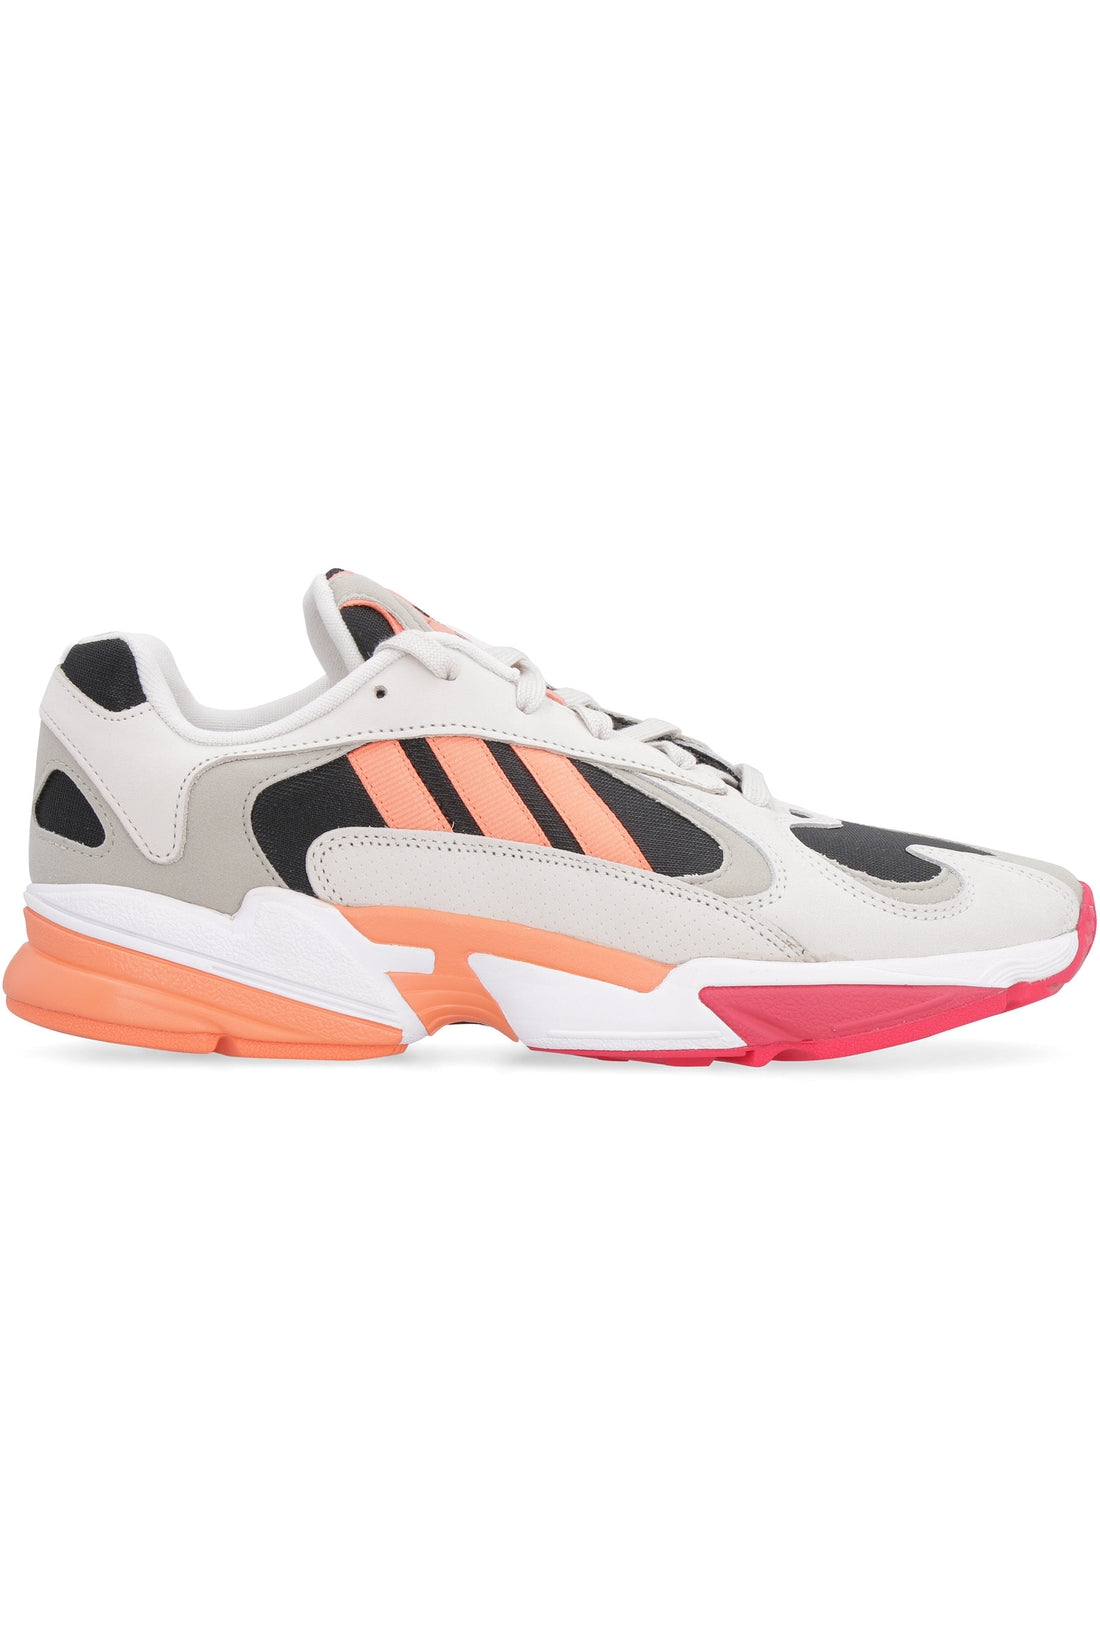 adidas-OUTLET-SALE-Yung-1 low-top sneakers-ARCHIVIST